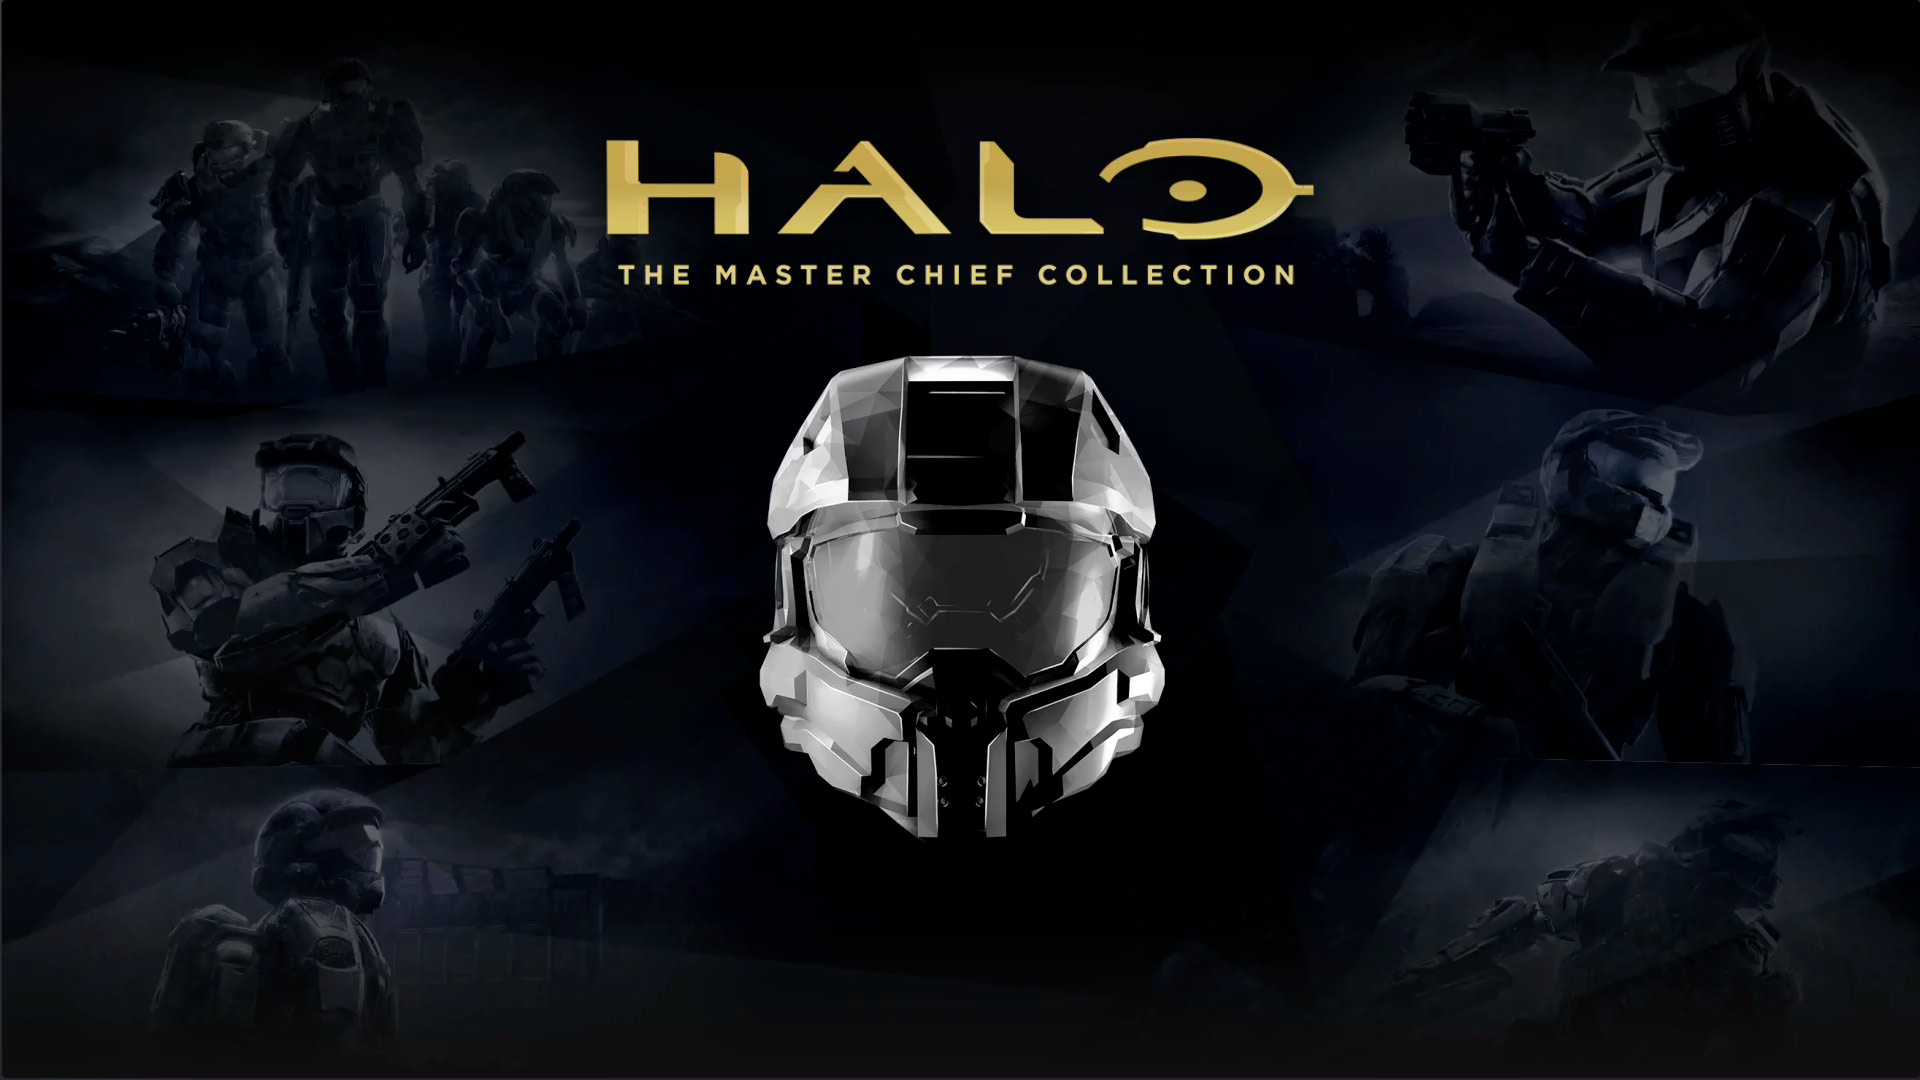 Halo: The Master Chief Collection (PC/Xbox One/Series X|S Digital Download) $10